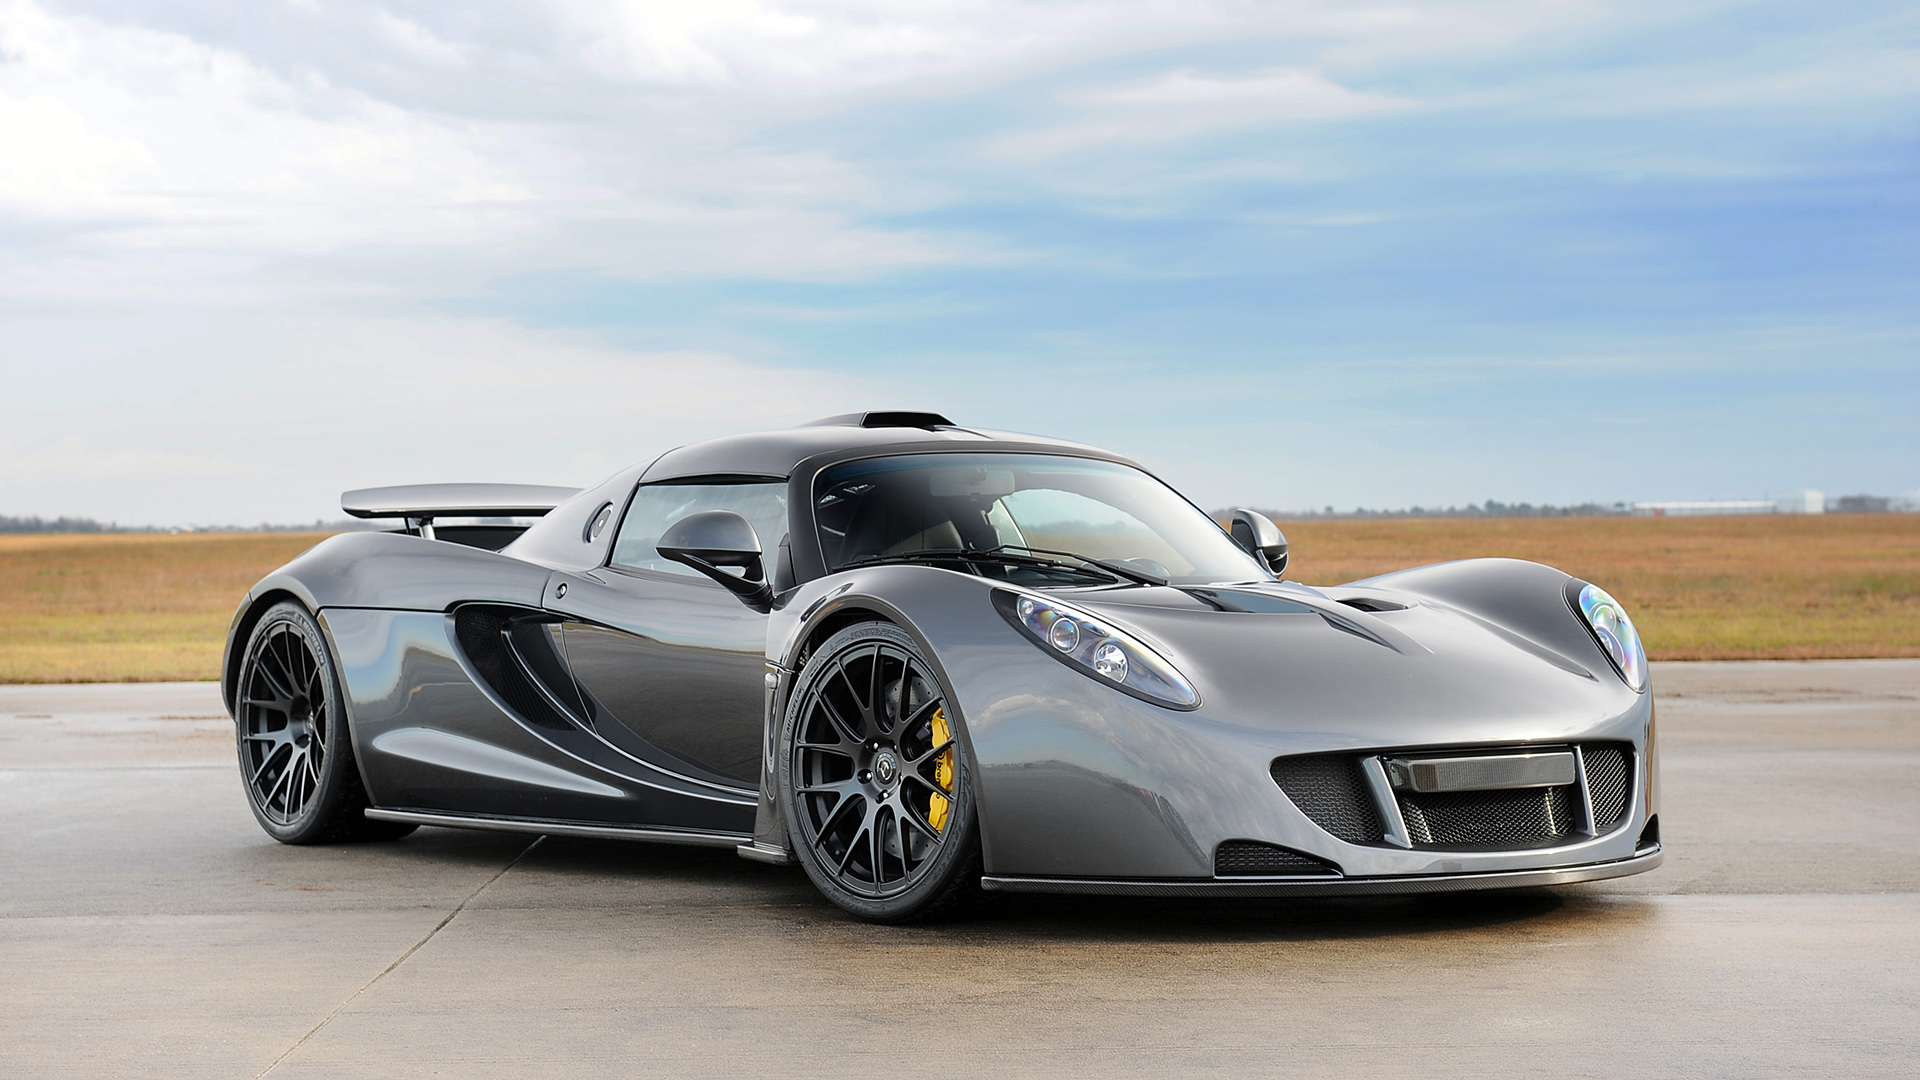 bikes and cars cars hennessey venom gt 2014 hd wallpaper Car Pictures